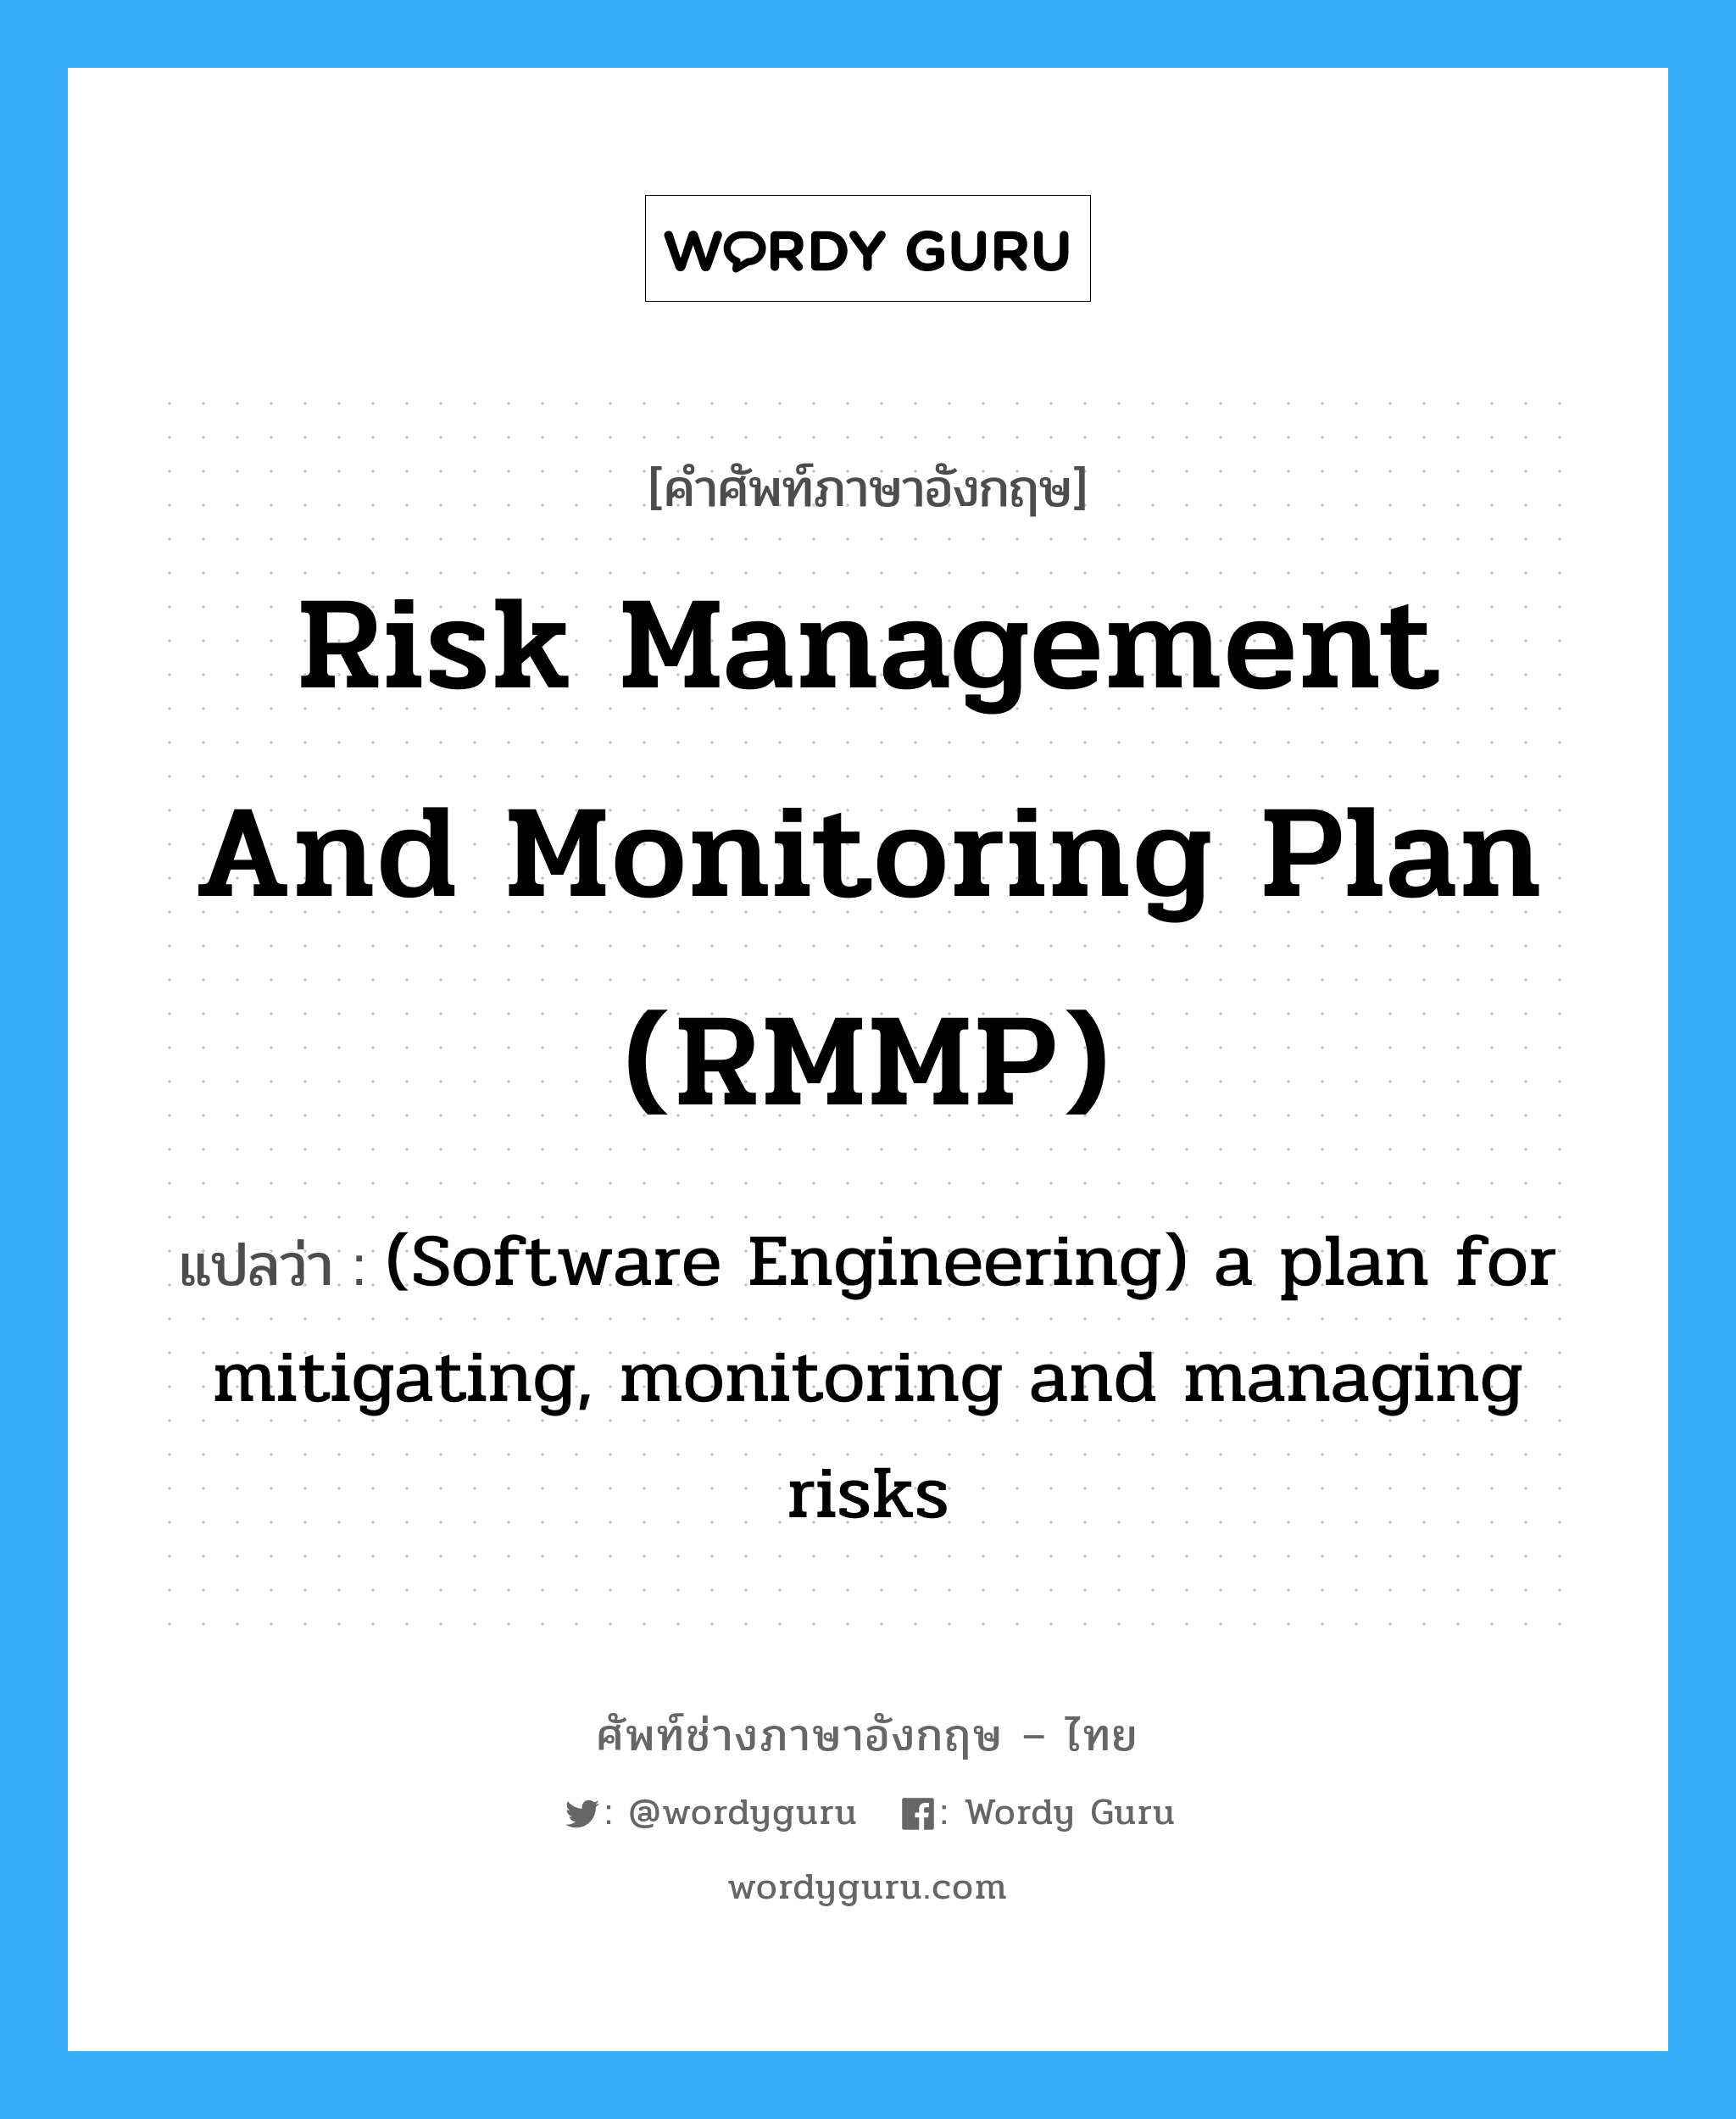 Risk Management and Monitoring Plan (RMMP) แปลว่า?, คำศัพท์ช่างภาษาอังกฤษ - ไทย Risk Management and Monitoring Plan (RMMP) คำศัพท์ภาษาอังกฤษ Risk Management and Monitoring Plan (RMMP) แปลว่า (Software Engineering) a plan for mitigating, monitoring and managing risks